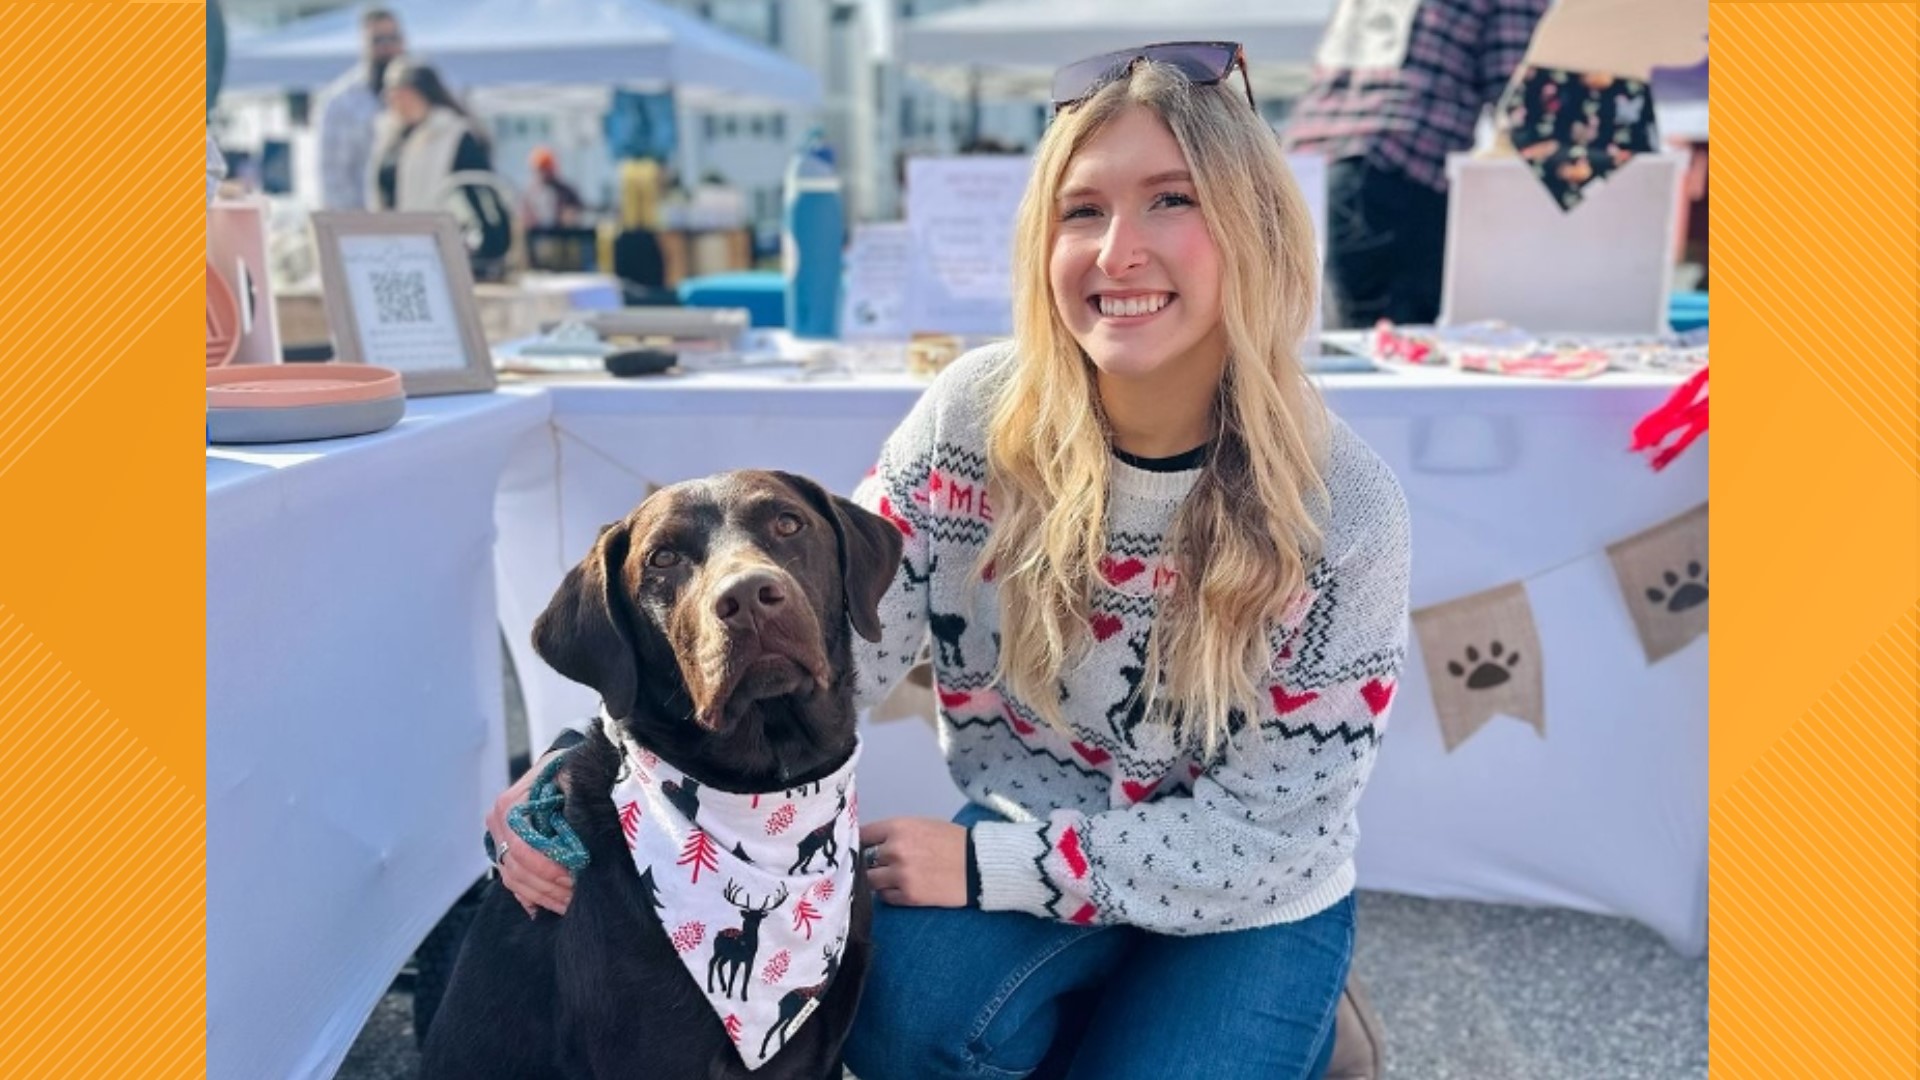 Bella Schwartz makes and sells handmade pet tags and scrunchie bandanas as "Ash & Bell Designs" on Etsy. Last Thursday she got an unexpected surge in followers.